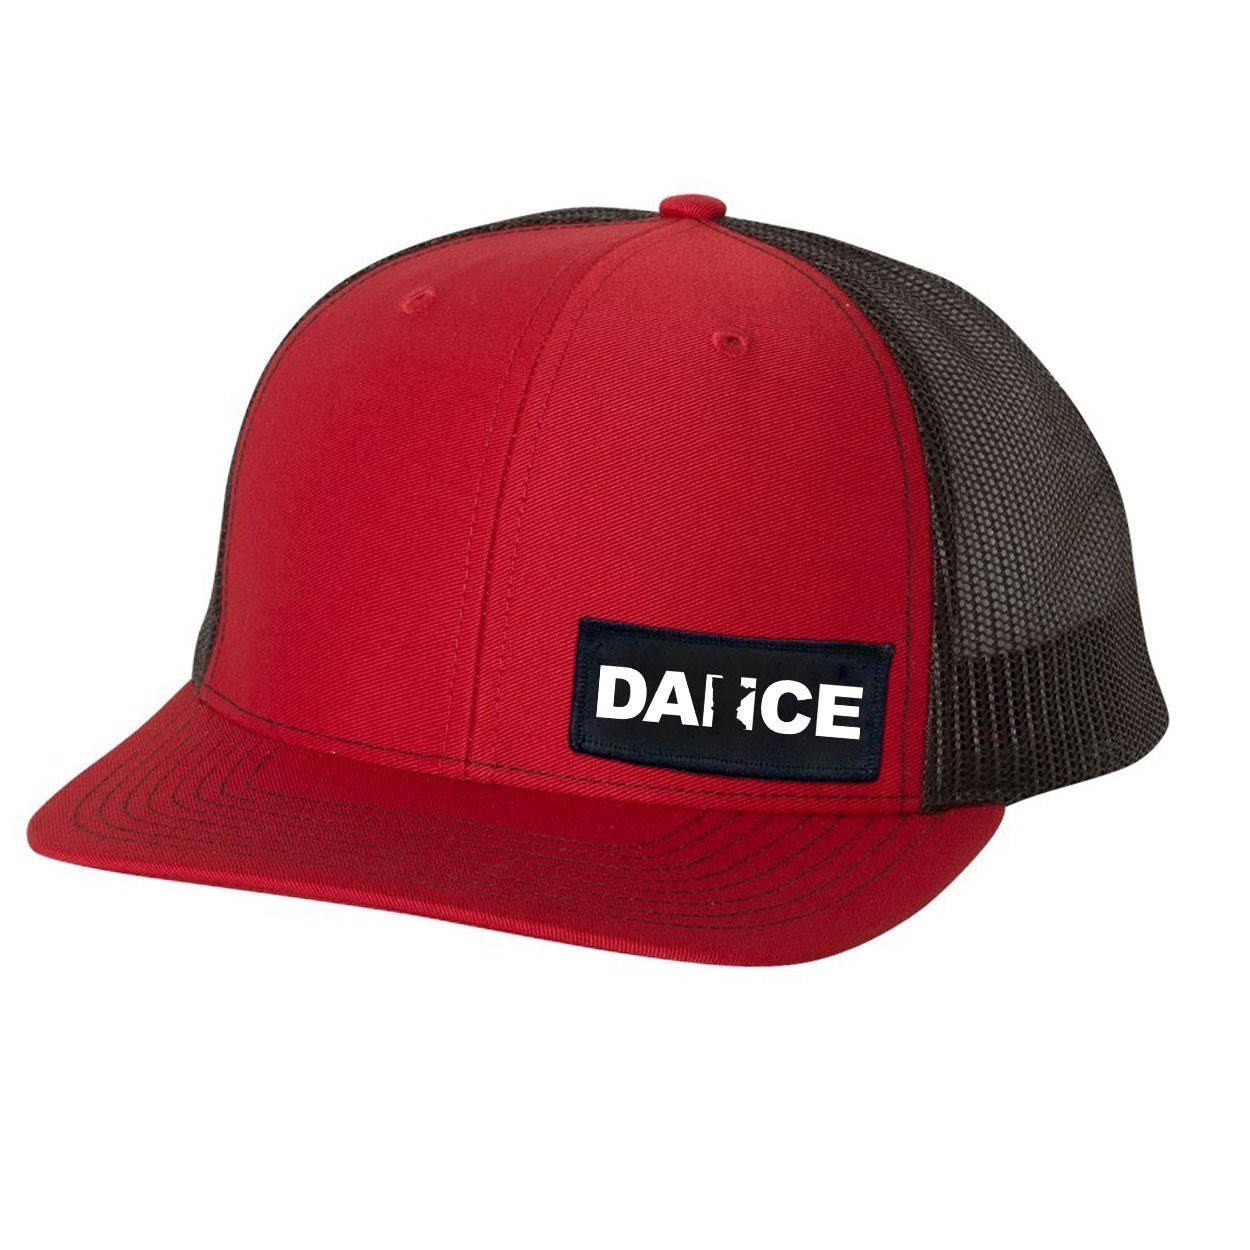 Dance Minnesota Night Out Woven Patch Snapback Trucker Hat Red/Black (White Logo)